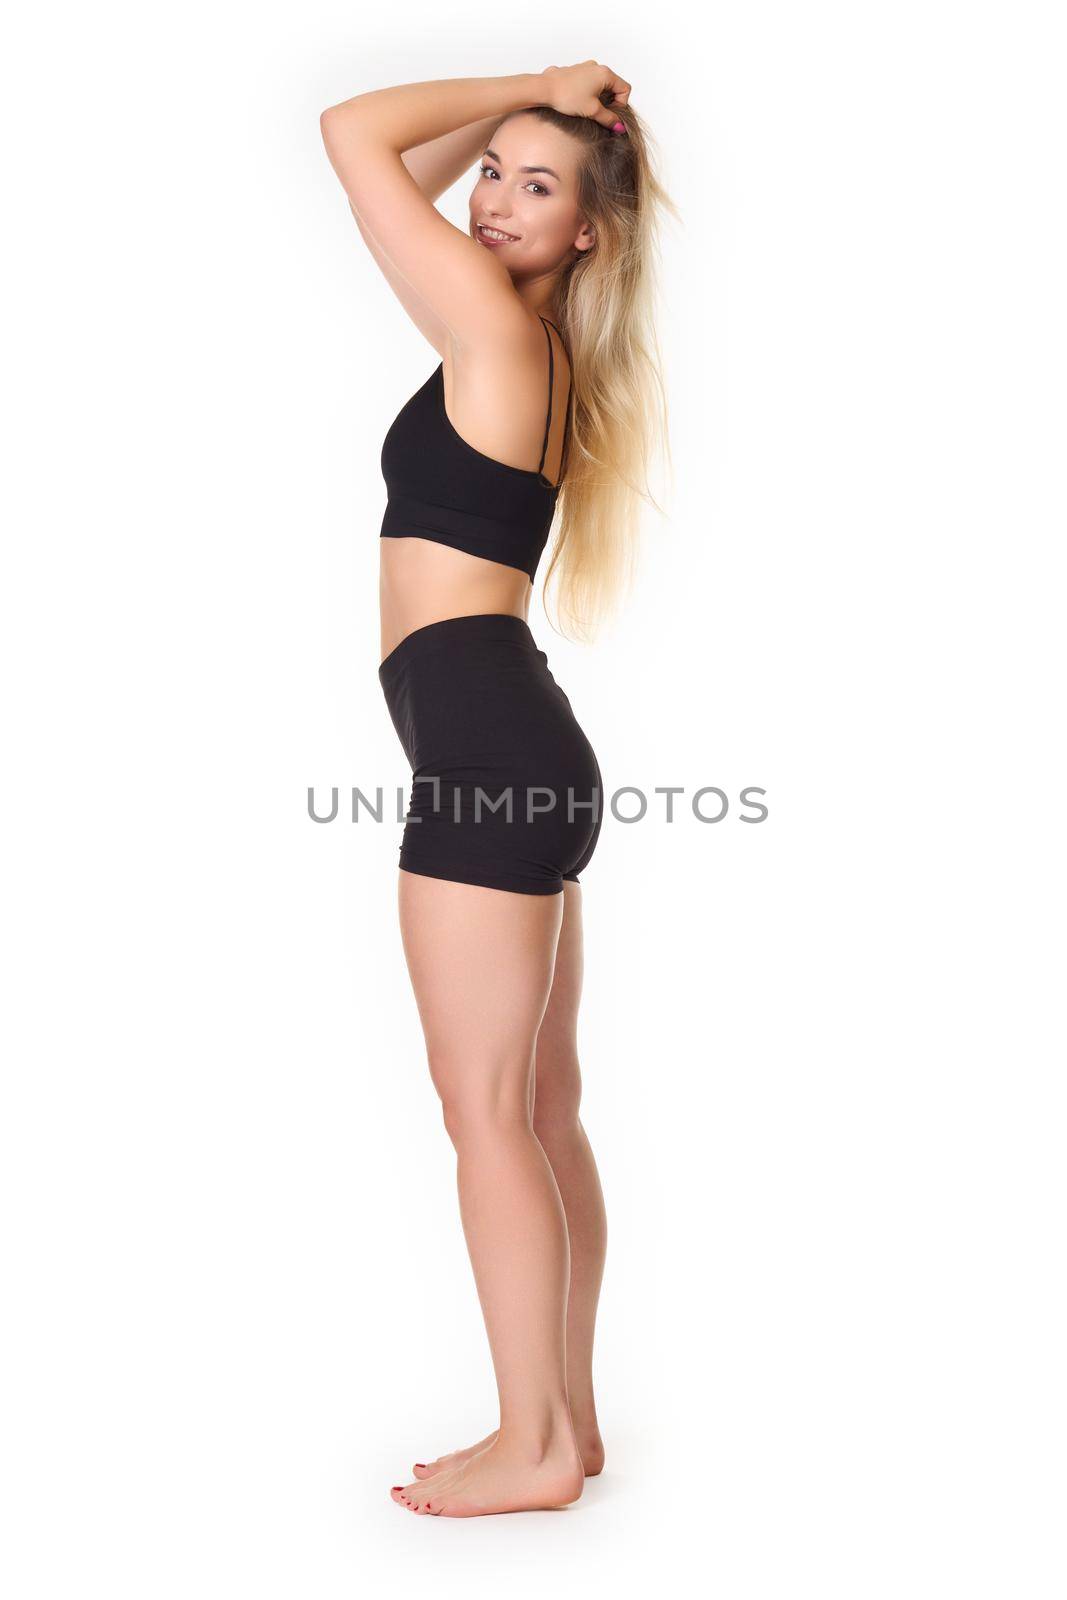 A young woman posing in a sports outfit on a white background. High quality photo